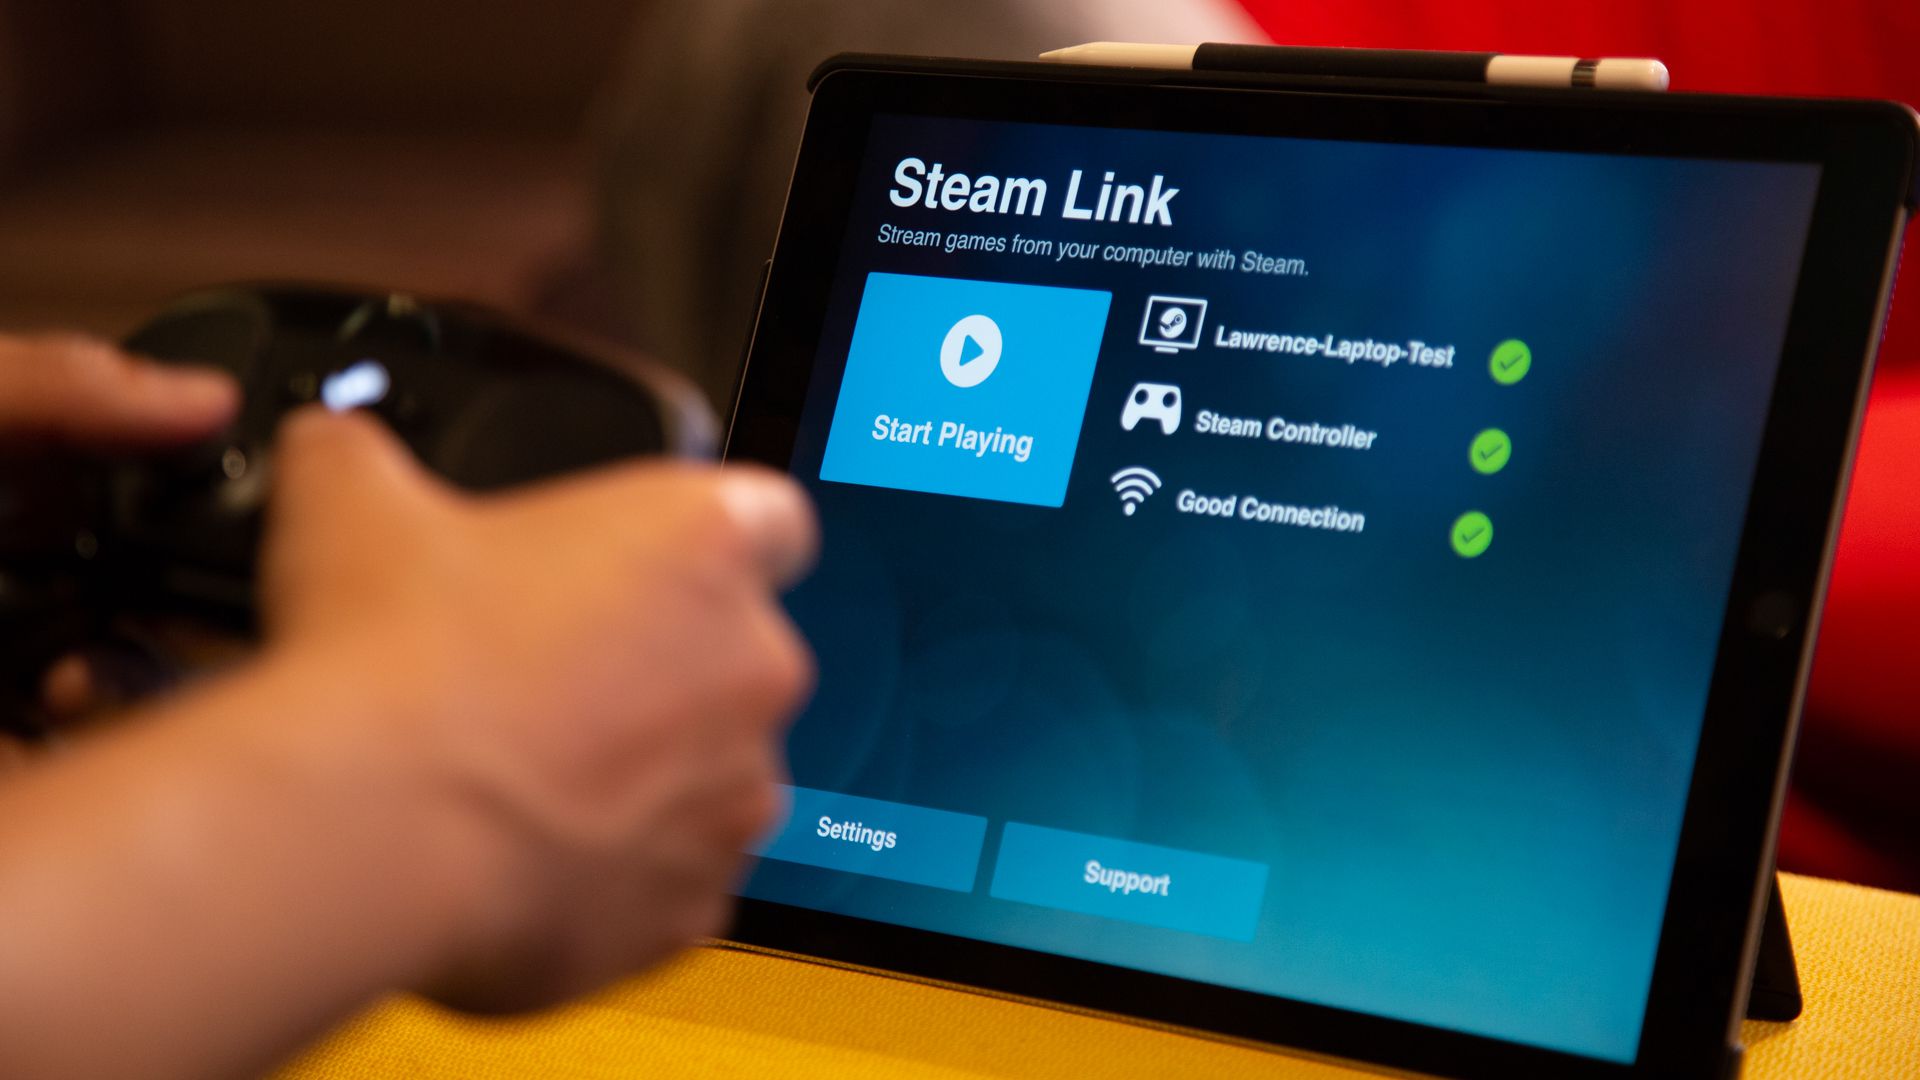 how to uninstall steam on mac os